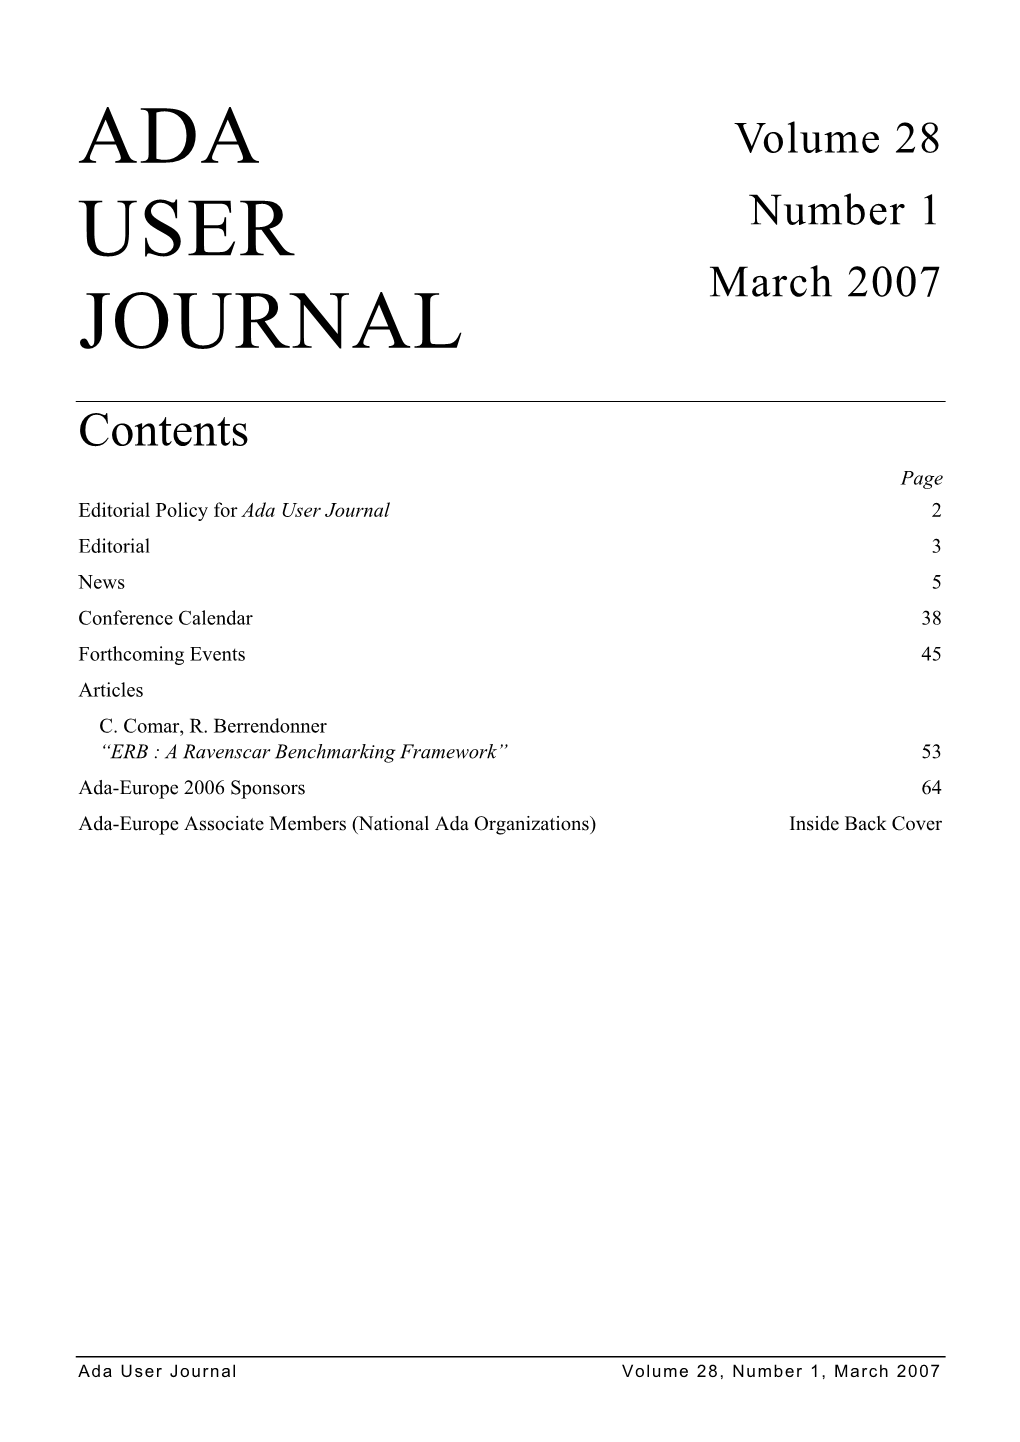 Volume 28 Number 1 March 2007